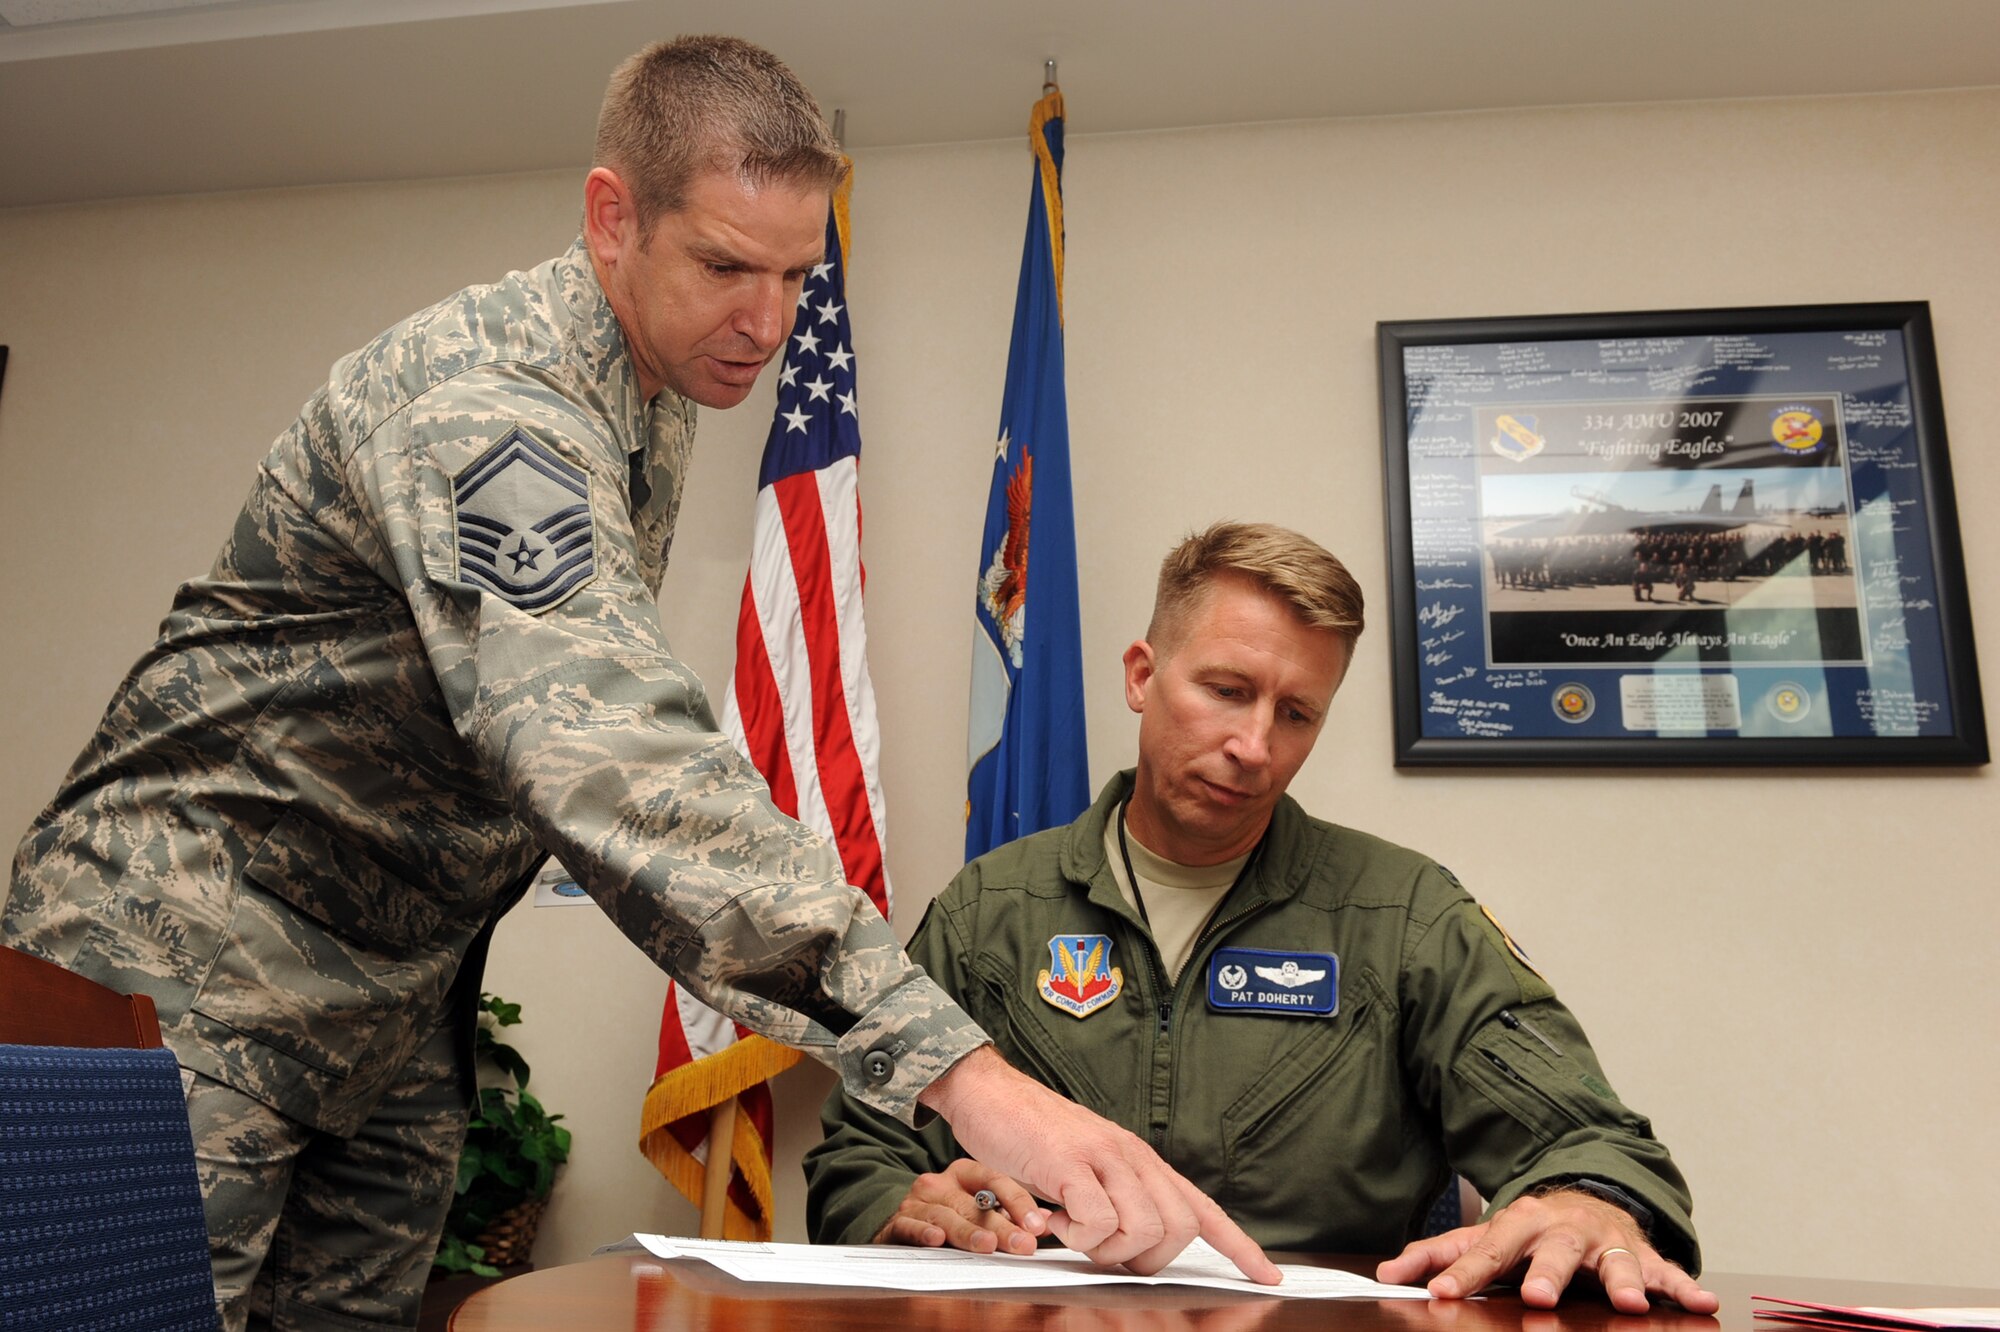 Senior Master Sgt. Michael Jenkins, 4th Medical Operations Squadron superintendant, reviews Colonel Patrick Doherty, 4th Fighter Wing (FW) commander, bone marrow consent form at Seymour Johnson Air Force Base, N.C., during bone marrow drive, Sept. 27, 2011. The bone marrow drive is searching for a donor match for an Army sergeant's daughter who is fighting leukemia. Doherty is a native of Lincoln, Neb. and Jenkins is a native of Lakeland, Fla. (U.S. Air Force photo by Senior Airman Whitney Stanfield) 